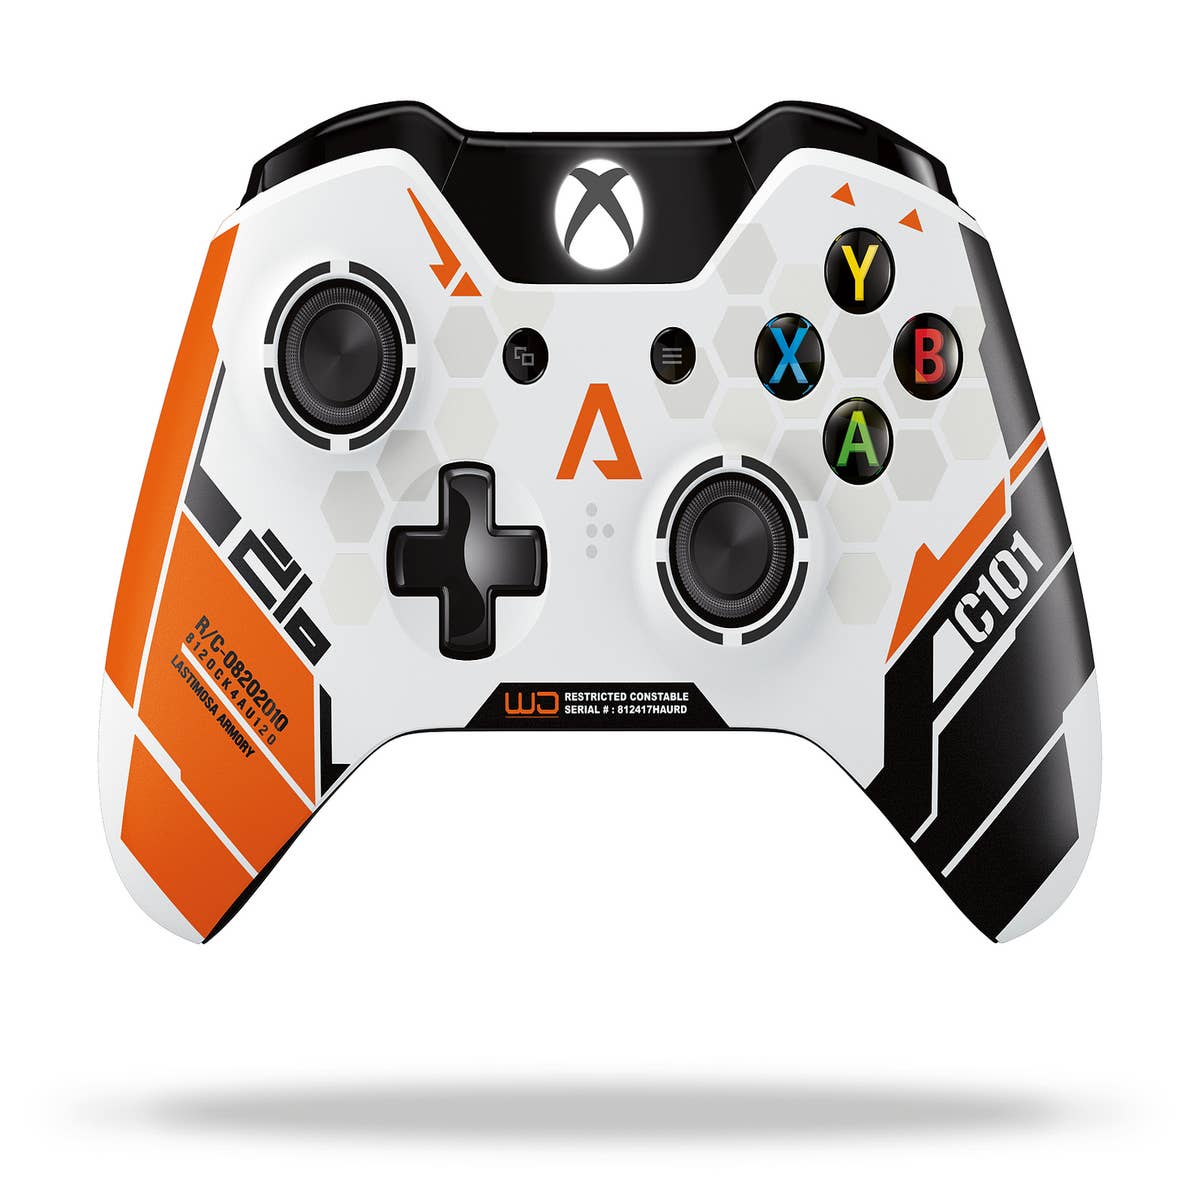 The Limited Edition Xbox One Titanfall Controller Looks Familiar